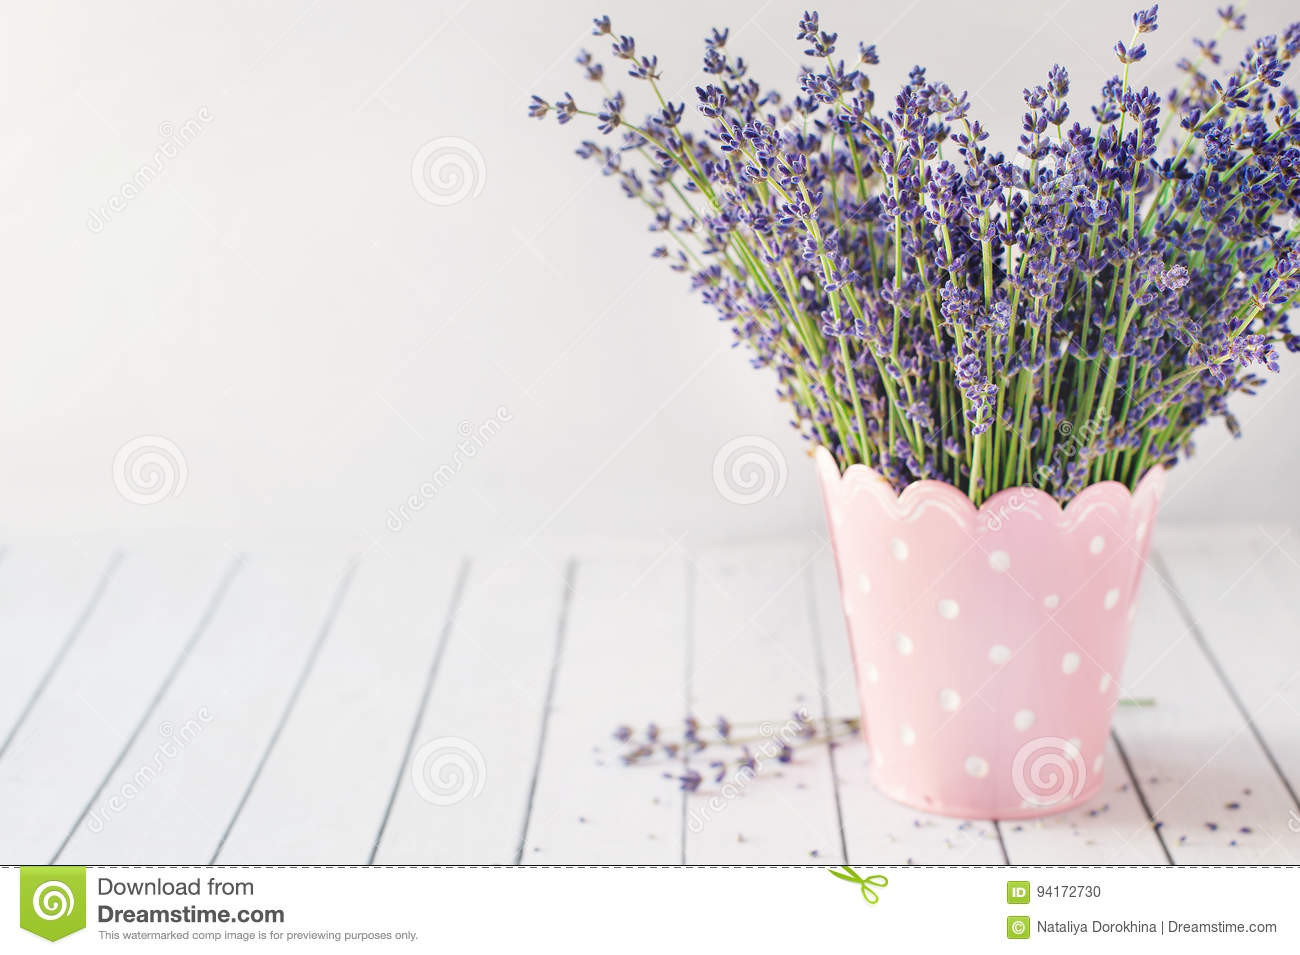 24 Popular Purple Flowers Bouquet In Vase 2024 free download purple flowers bouquet in vase of bouquet of lavender in a vase provence style stock photo image of within download bouquet of lavender in a vase provence style stock photo image of border